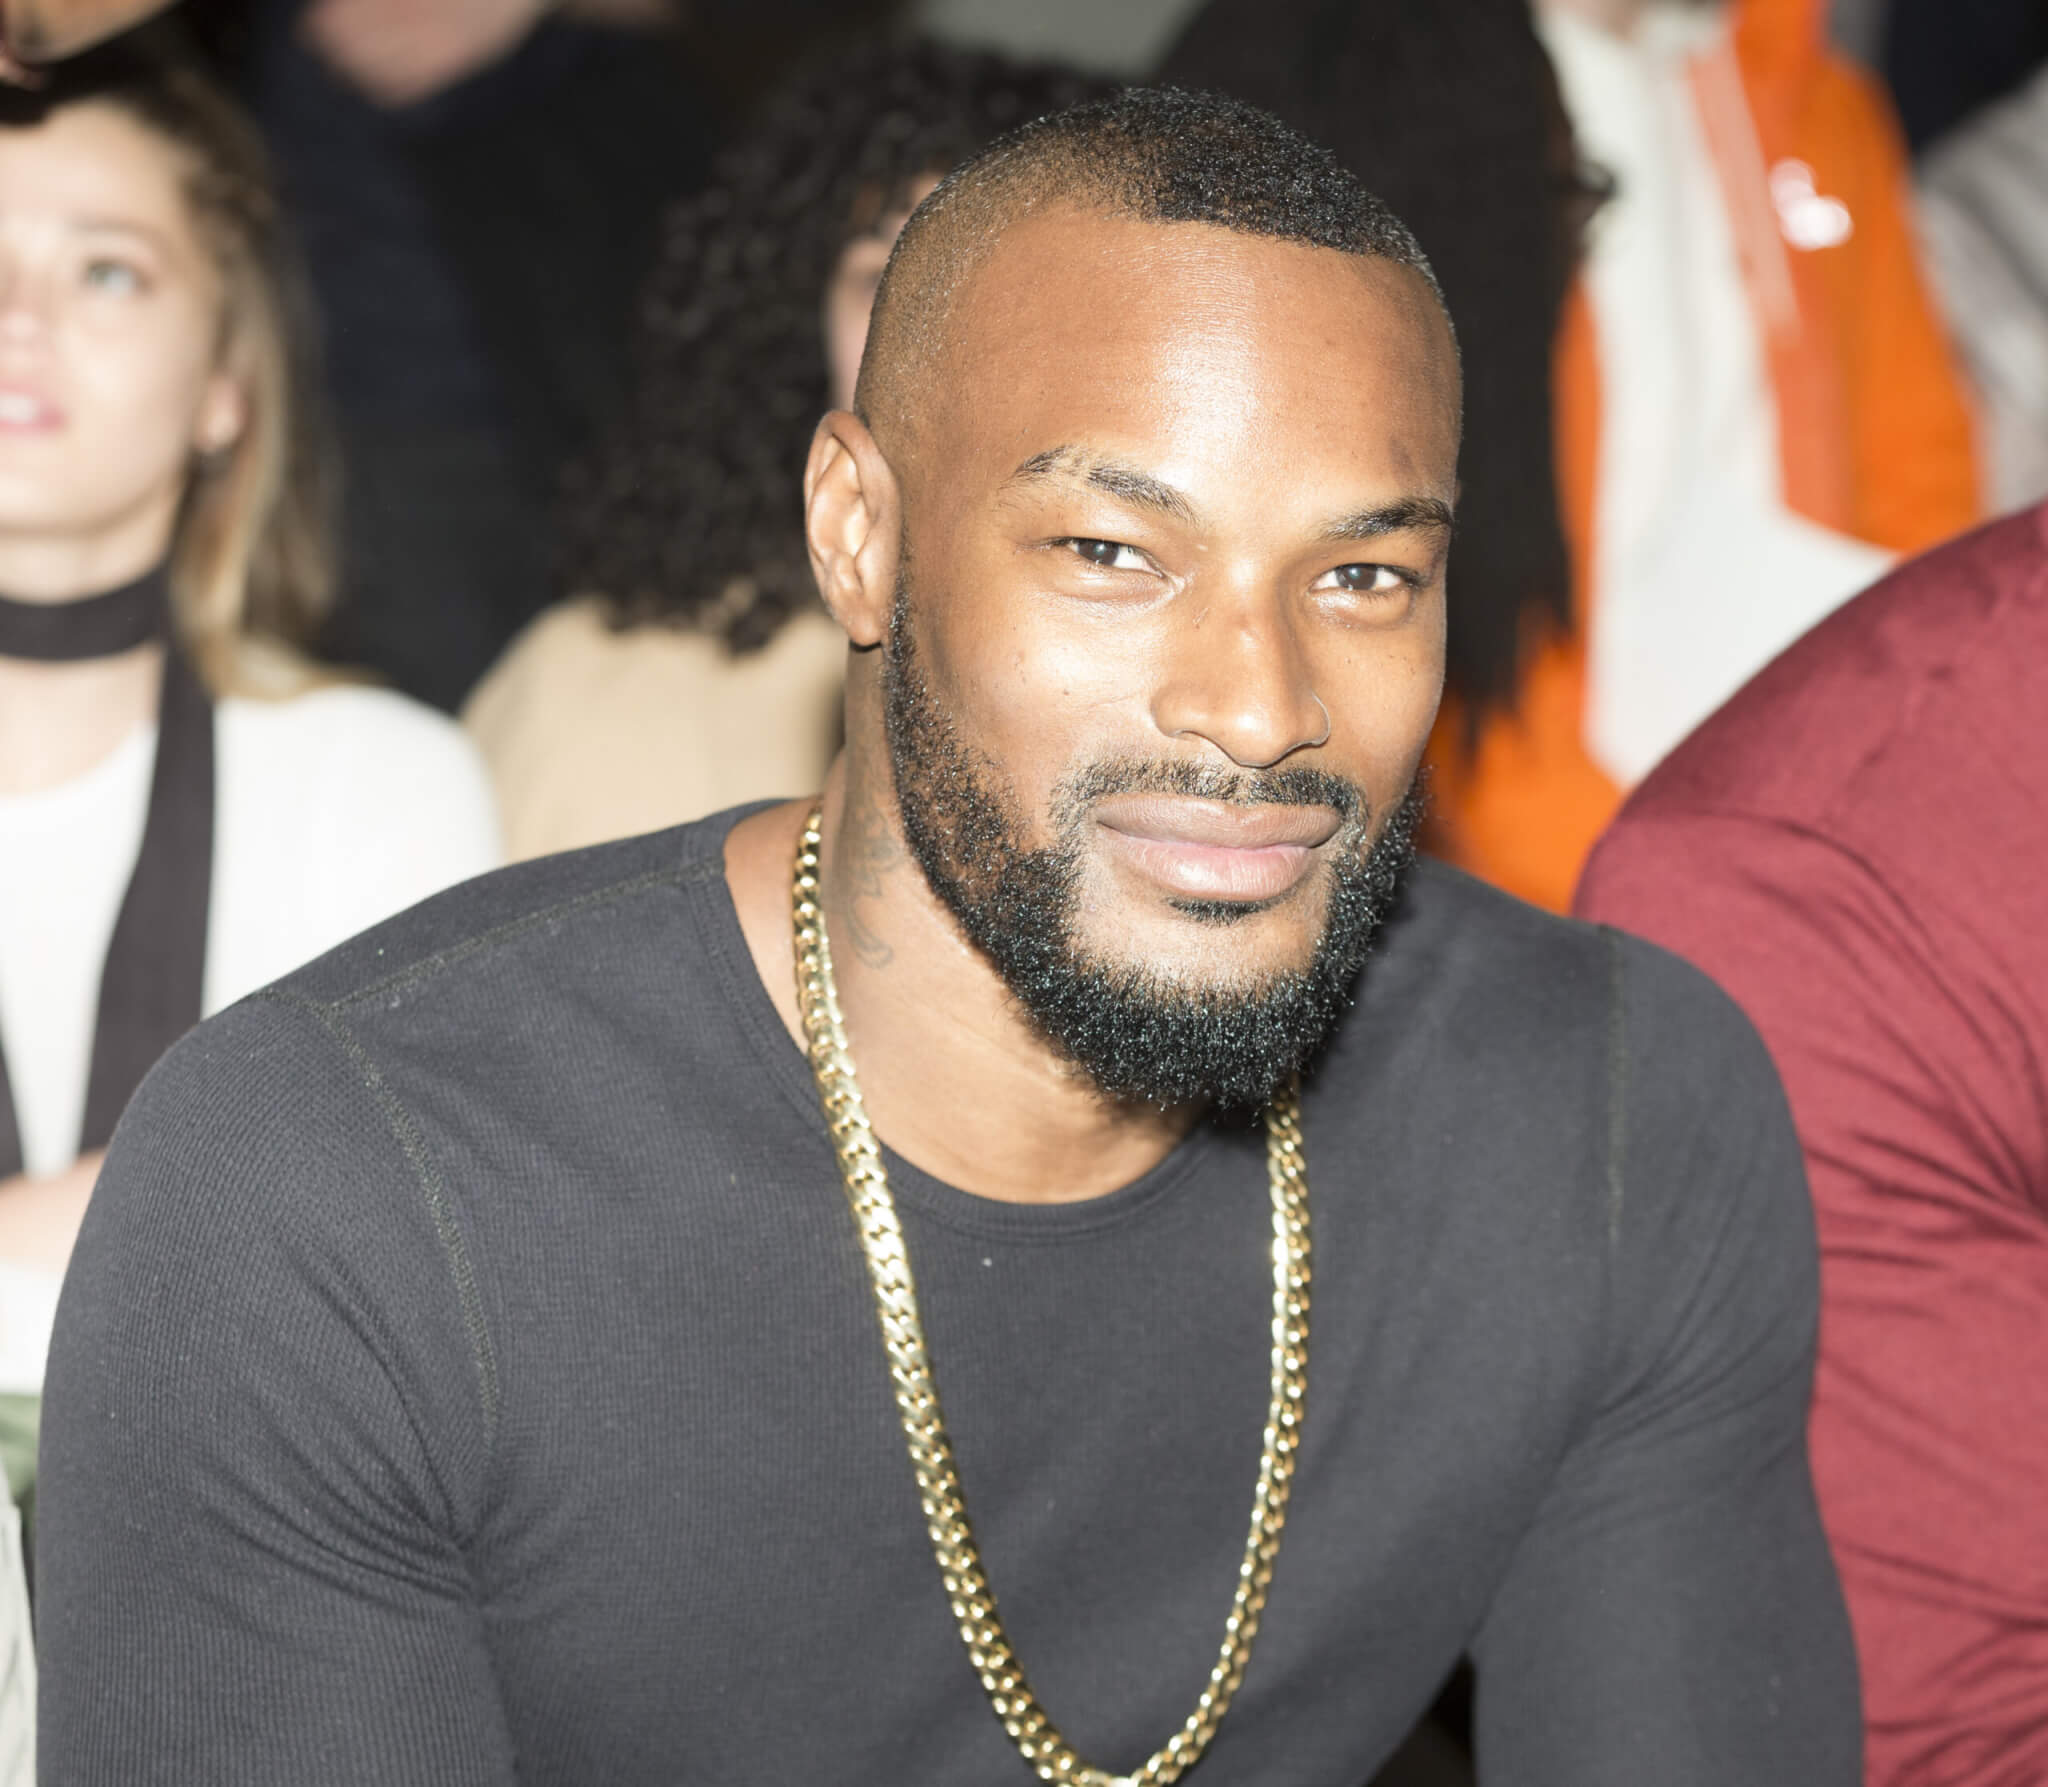 Tyson Beckford attends runway show for Timex x Todd Snyder during Fashion Week 2016 